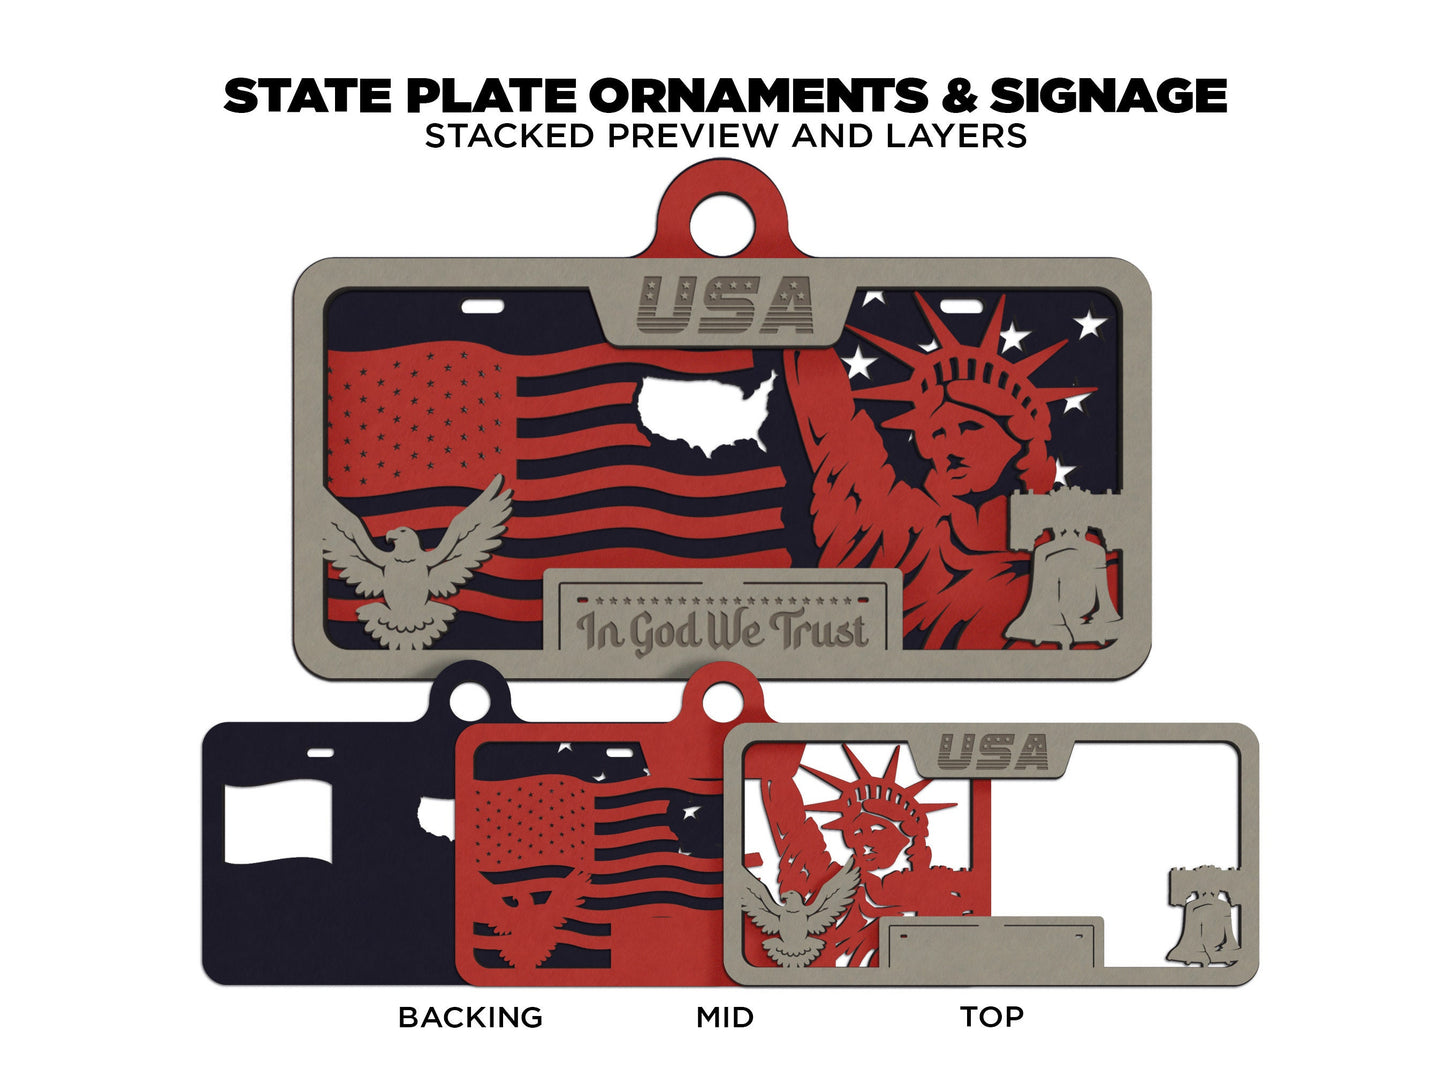 Louisiana State Plate Ornament and Signage - SVG File Download - Sized for Glowforge - Laser Ready Digital Files